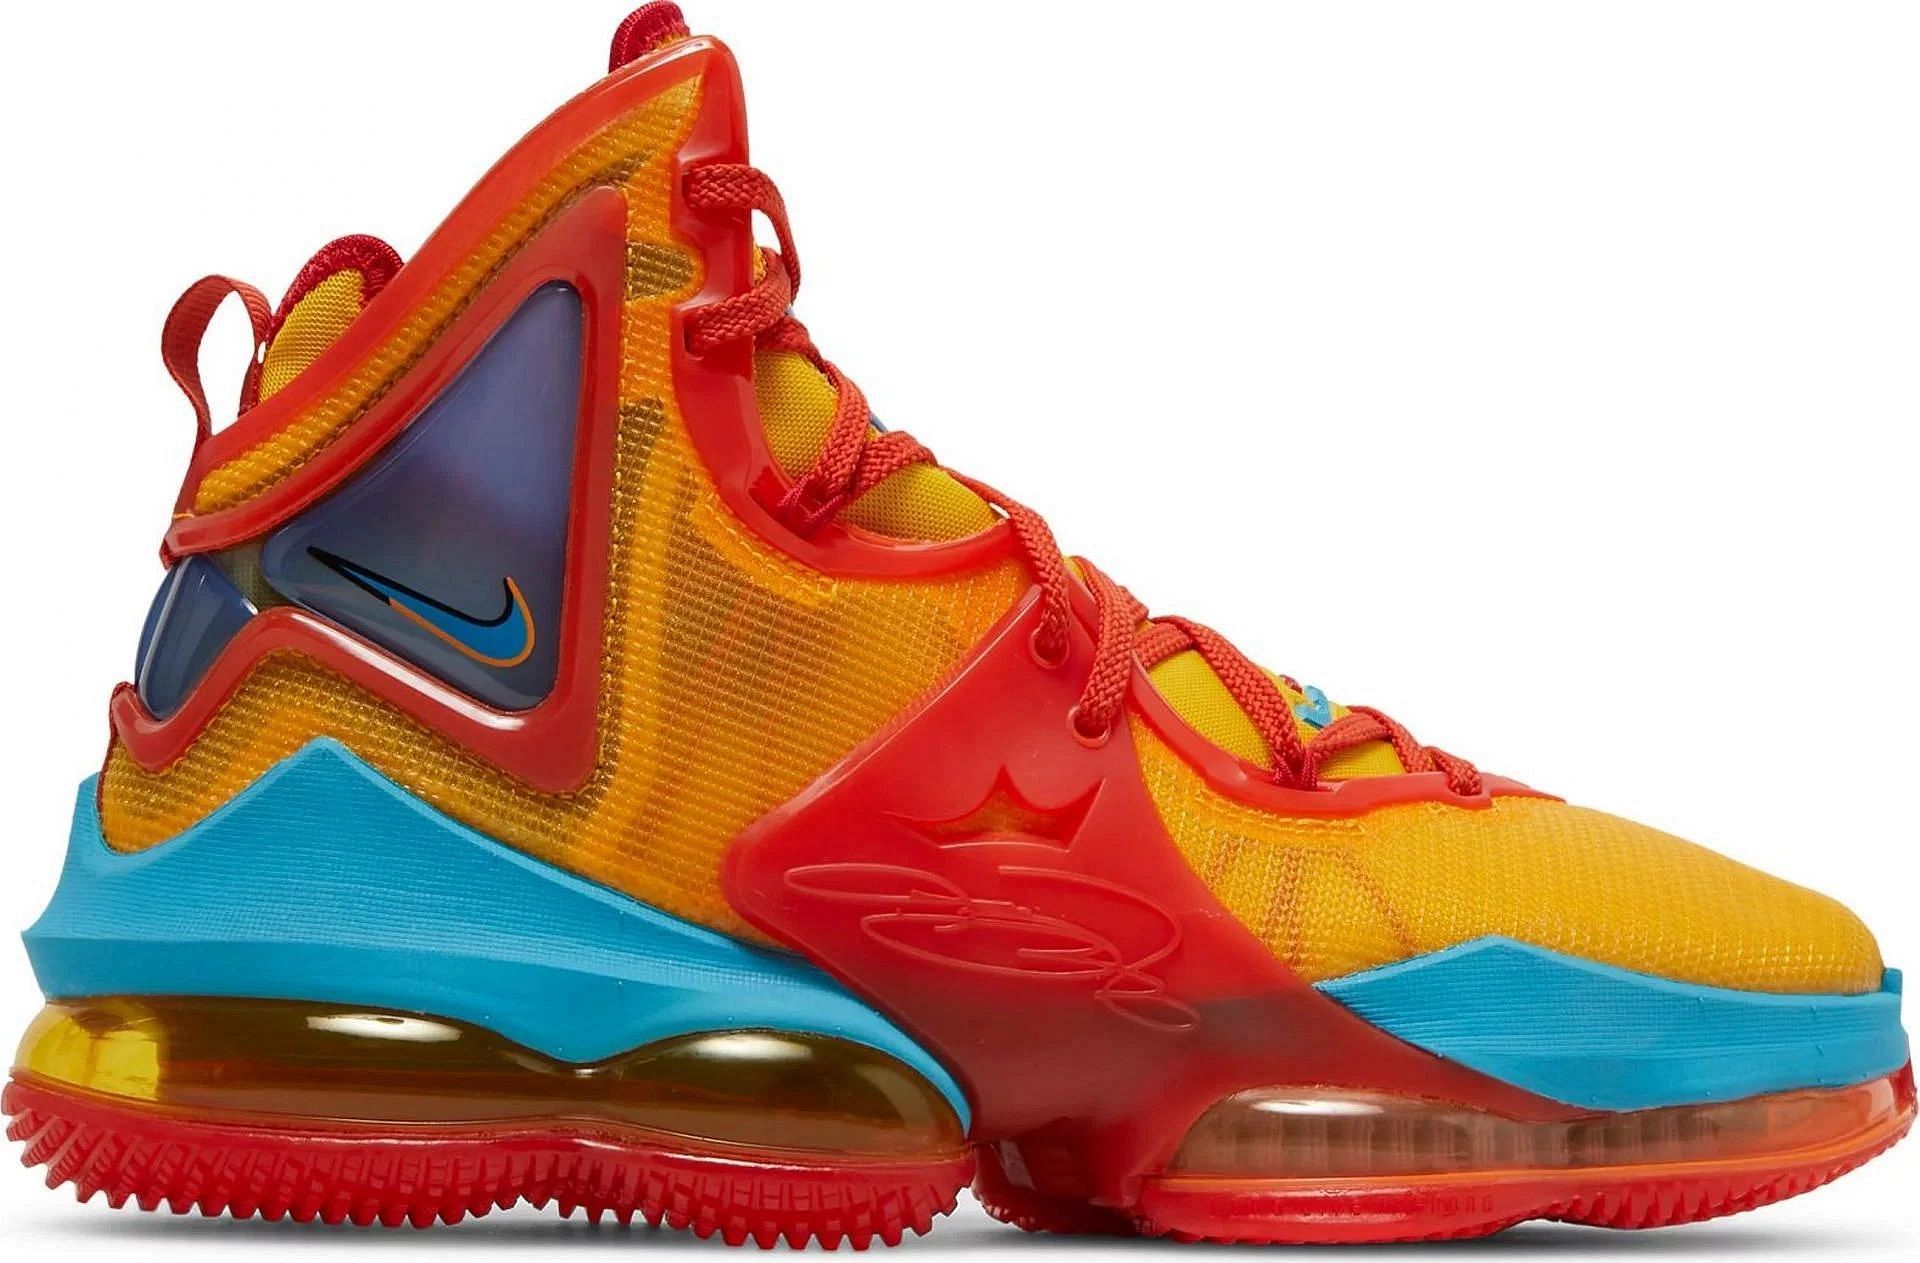 LeBron James' shoes 5 best sneaker collabs from LBJ's shoe line